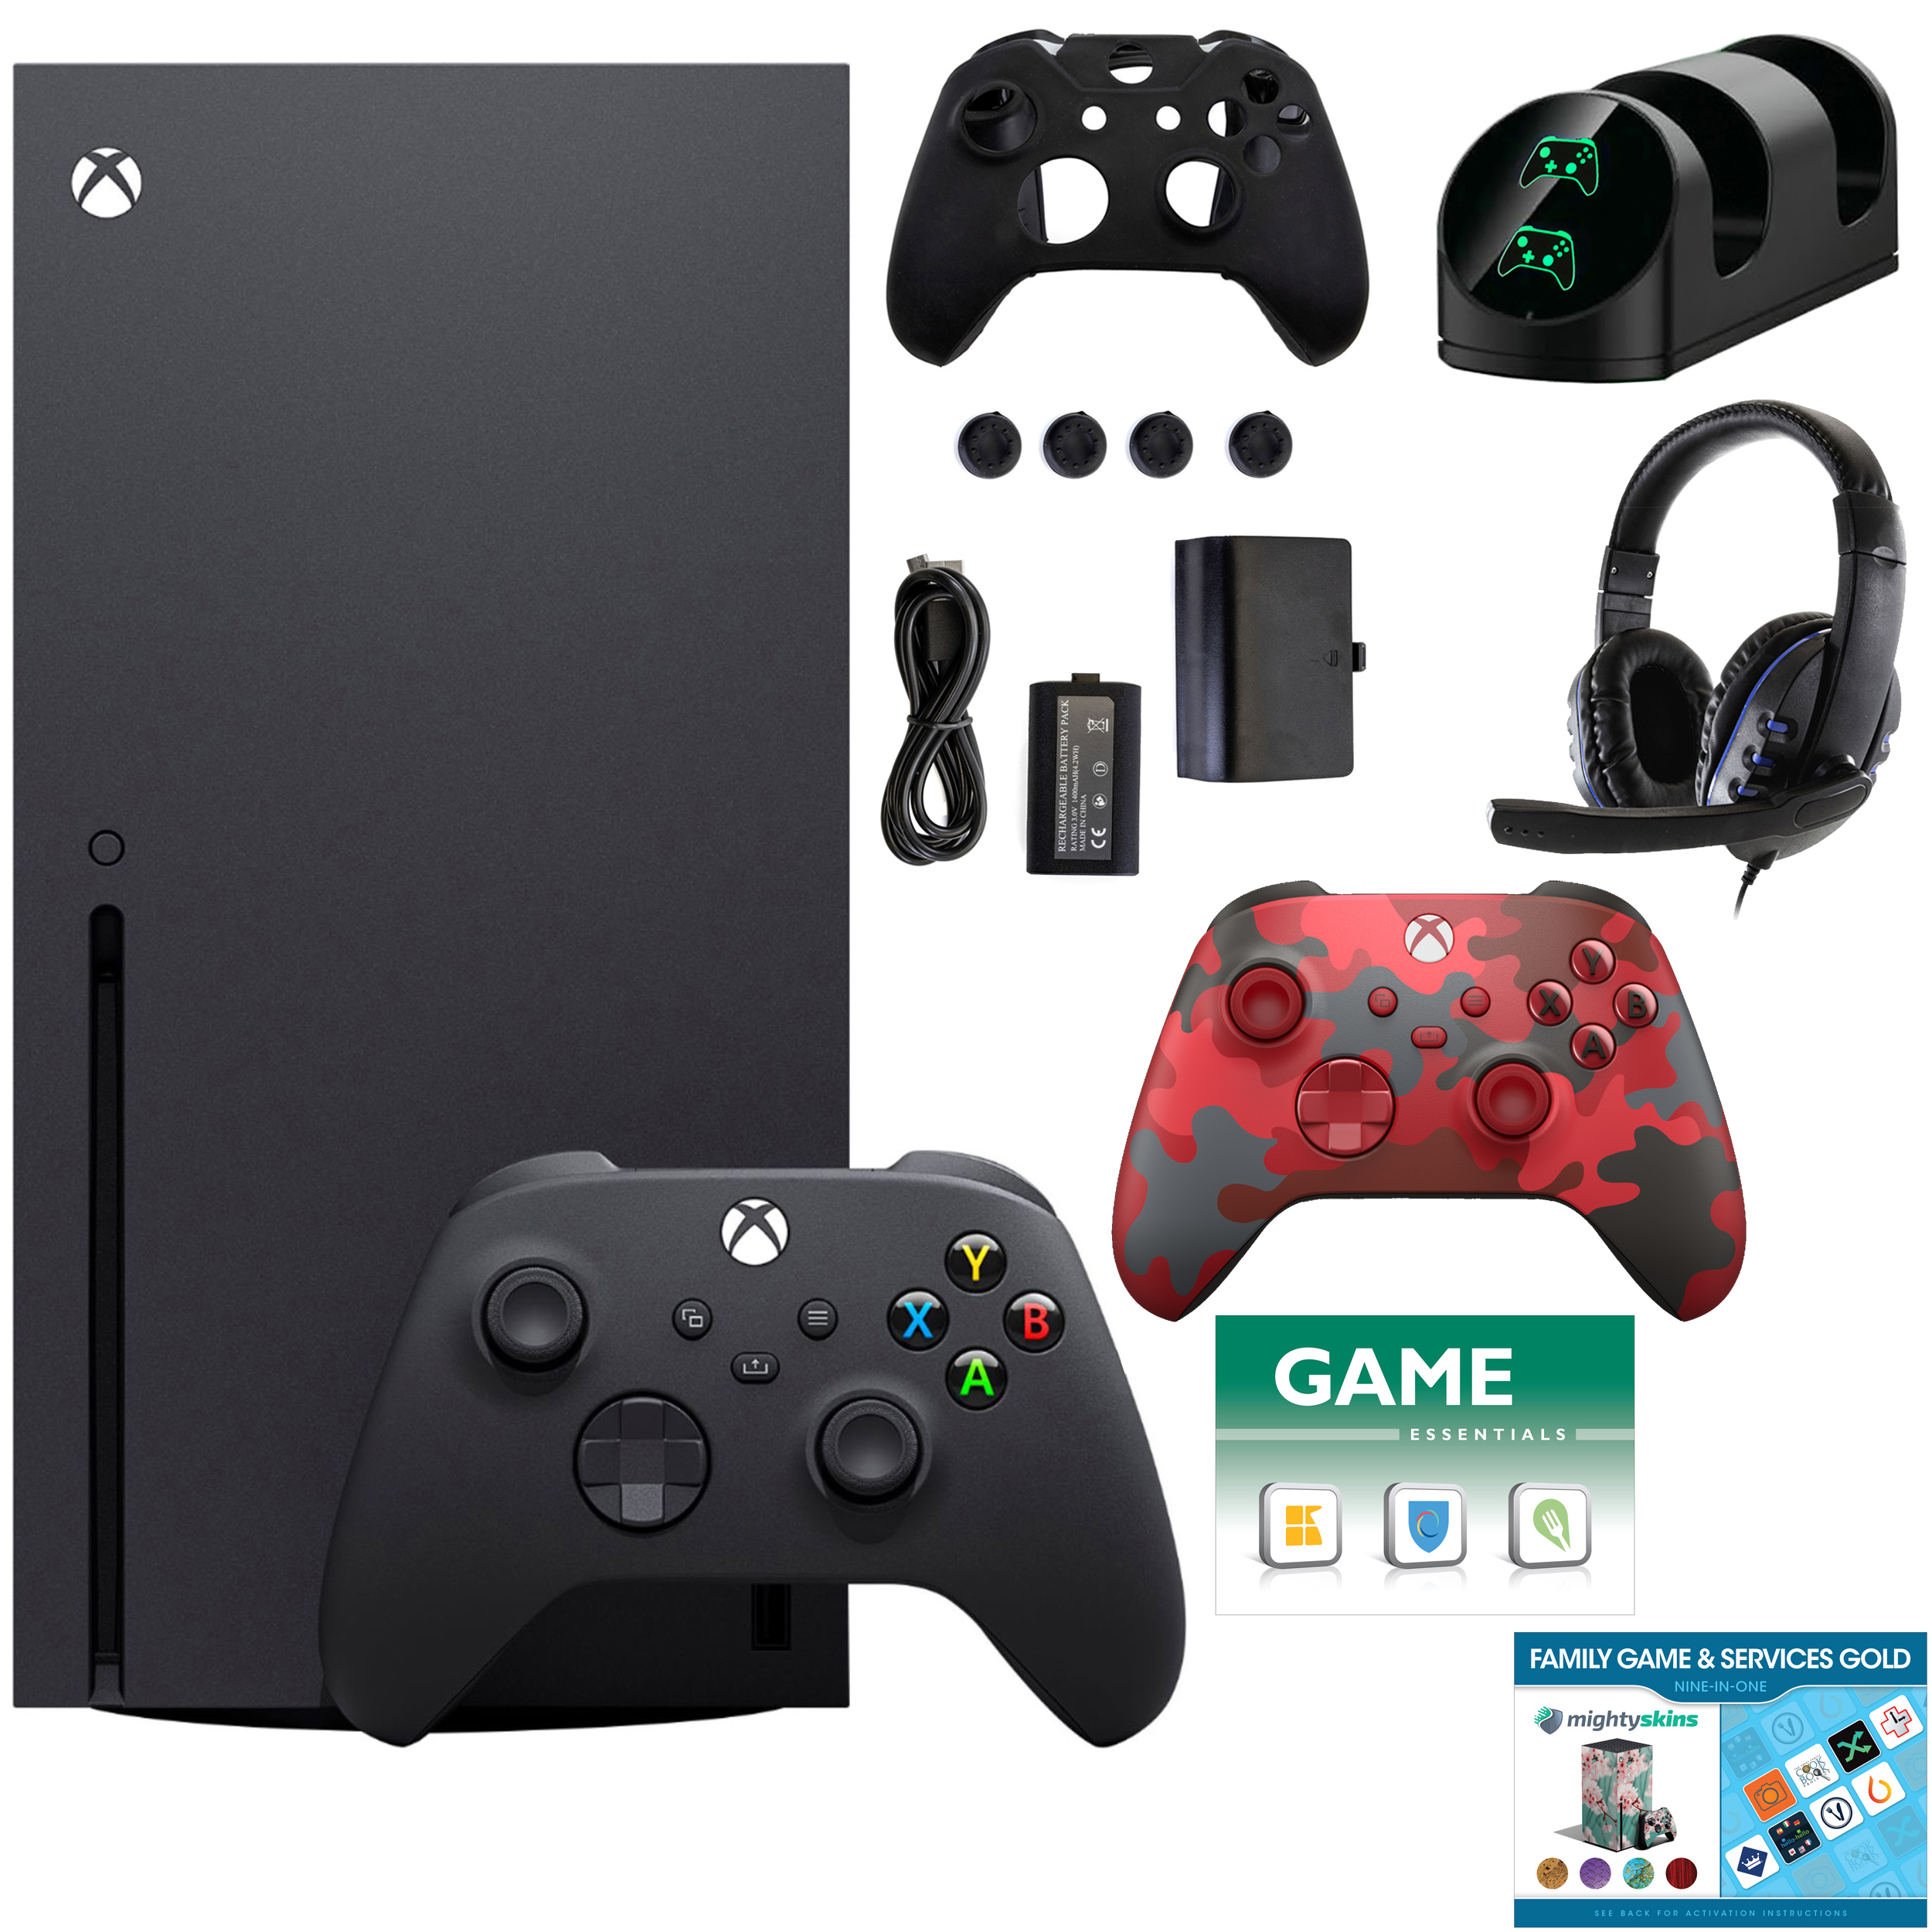 Microsoft Xbox Series X 1TB Console with Extra Daystrike Controller Accessories Kit and 2 Vouchers